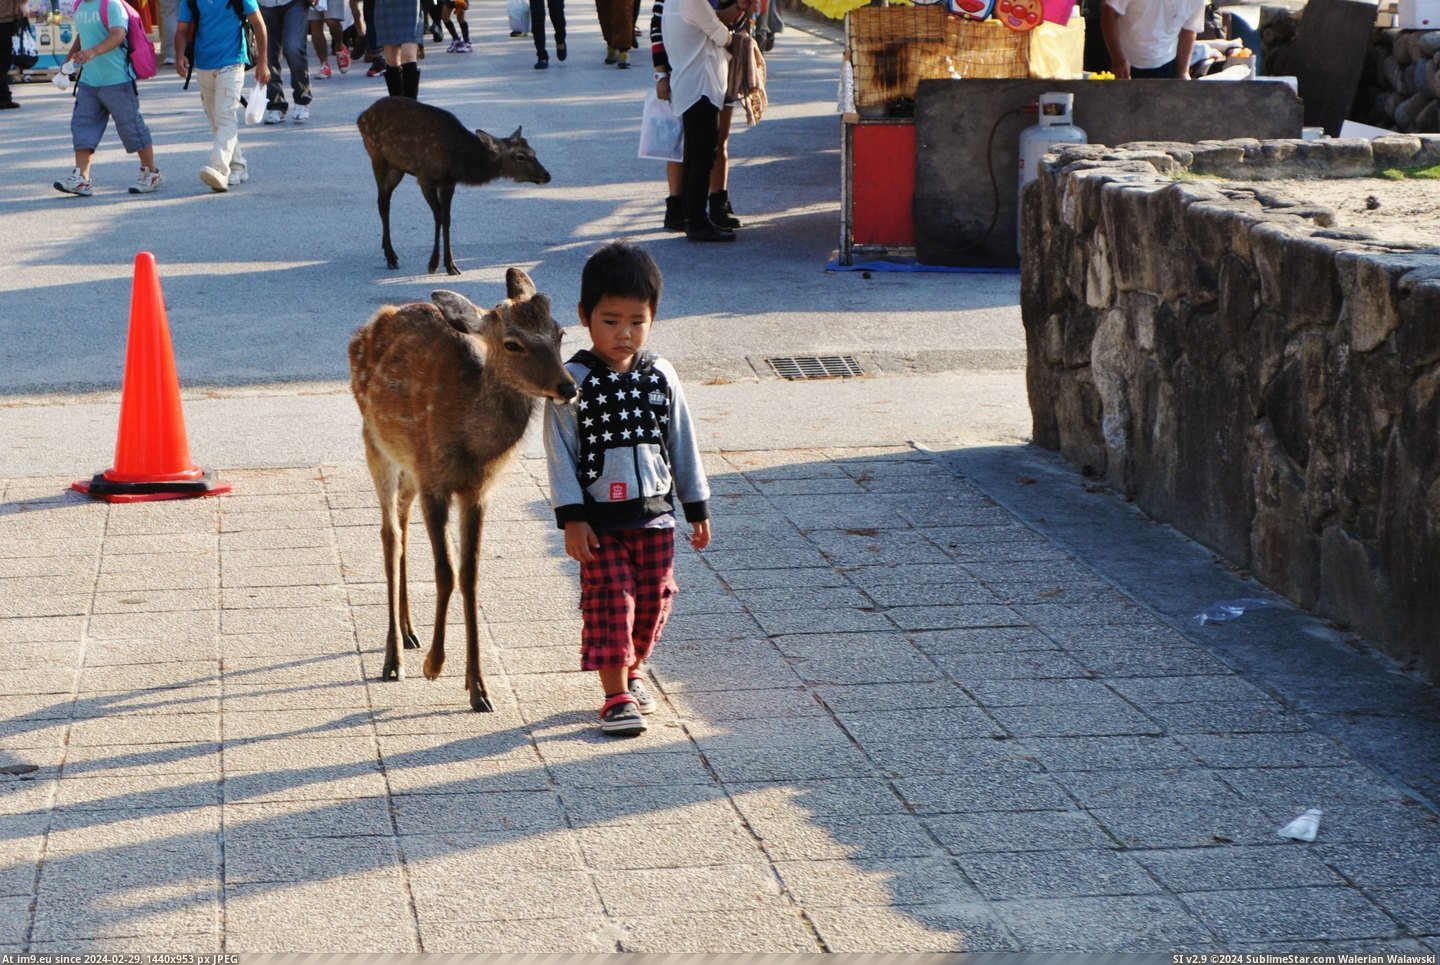 #One #Free #Island #Hundreds #Roam #Silently #Miyajima #Japan #Walking #Deer [Aww] There's an island in Japan, Miyajima, where deer roam free by the hundreds. This one was silently walking around with this Pic. (Изображение из альбом My r/AWW favs))